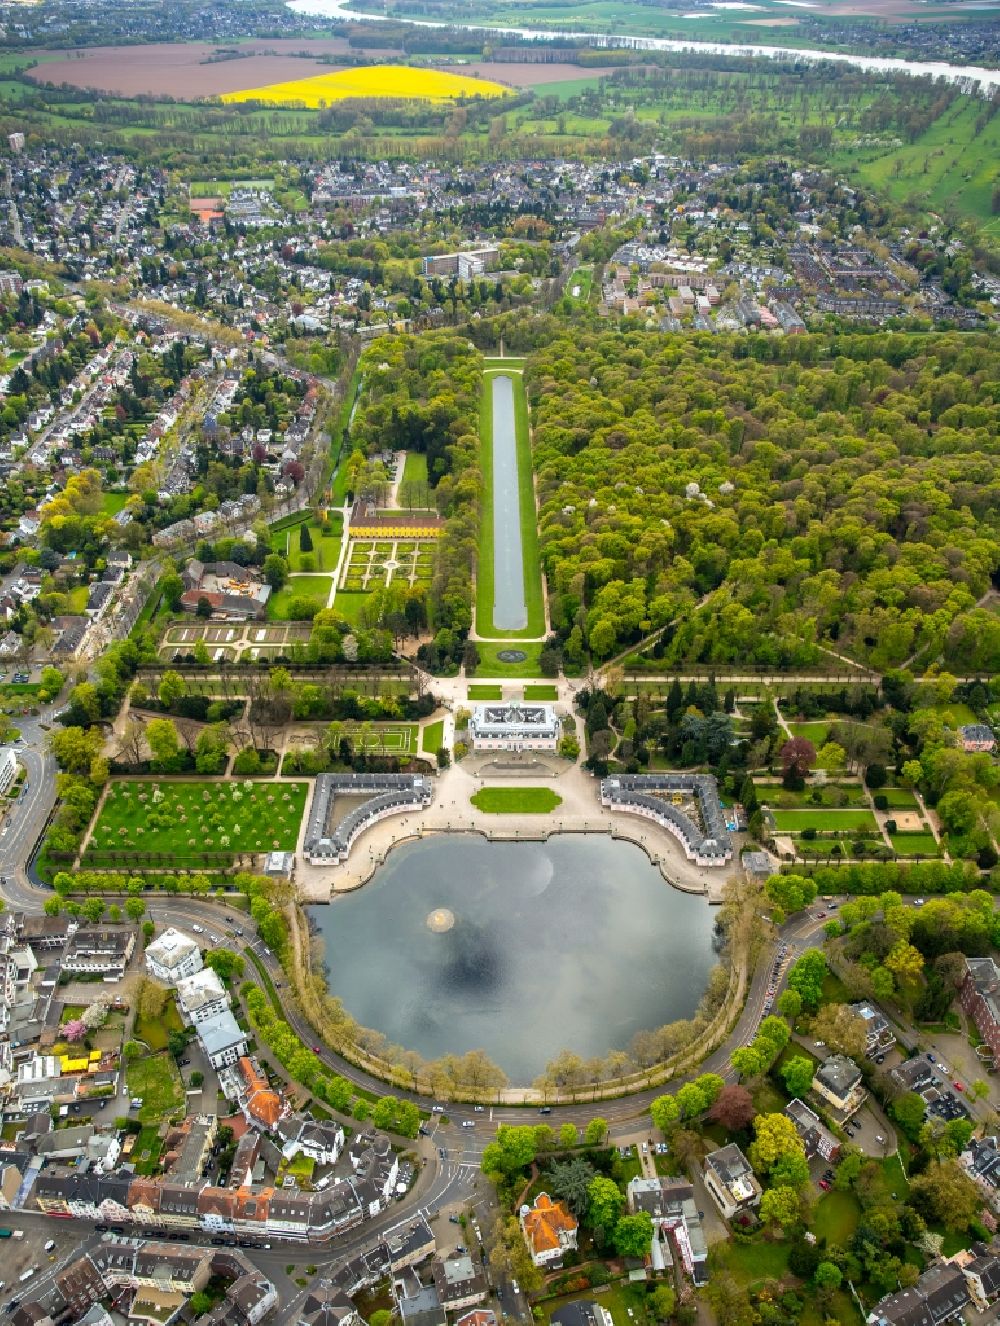 Düsseldorf from above - Park of Schloss Benrath castle in Duesseldorf in the state of North Rhine-Westphalia